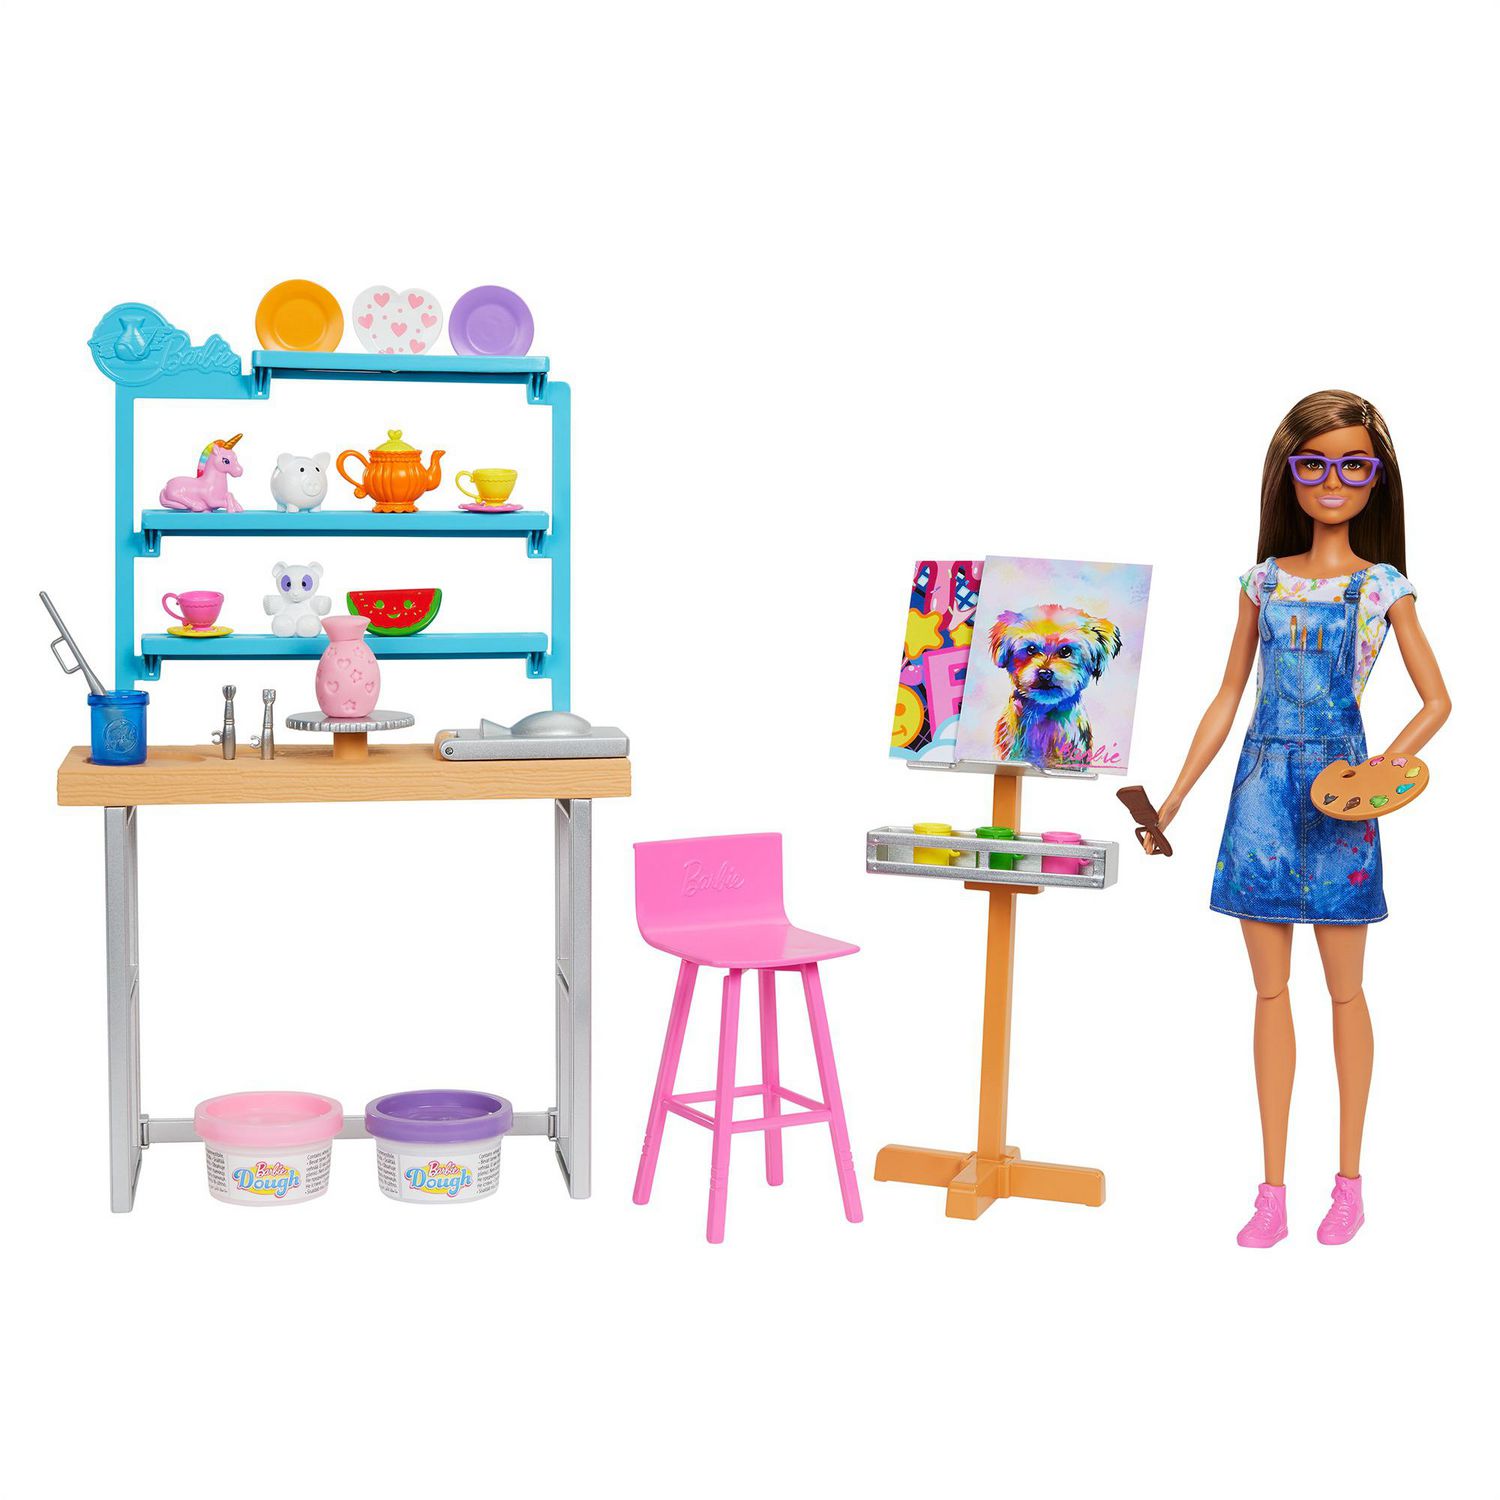 Barbie Relax and Create Art Studio, Barbie Doll (11.5 inches), 25+